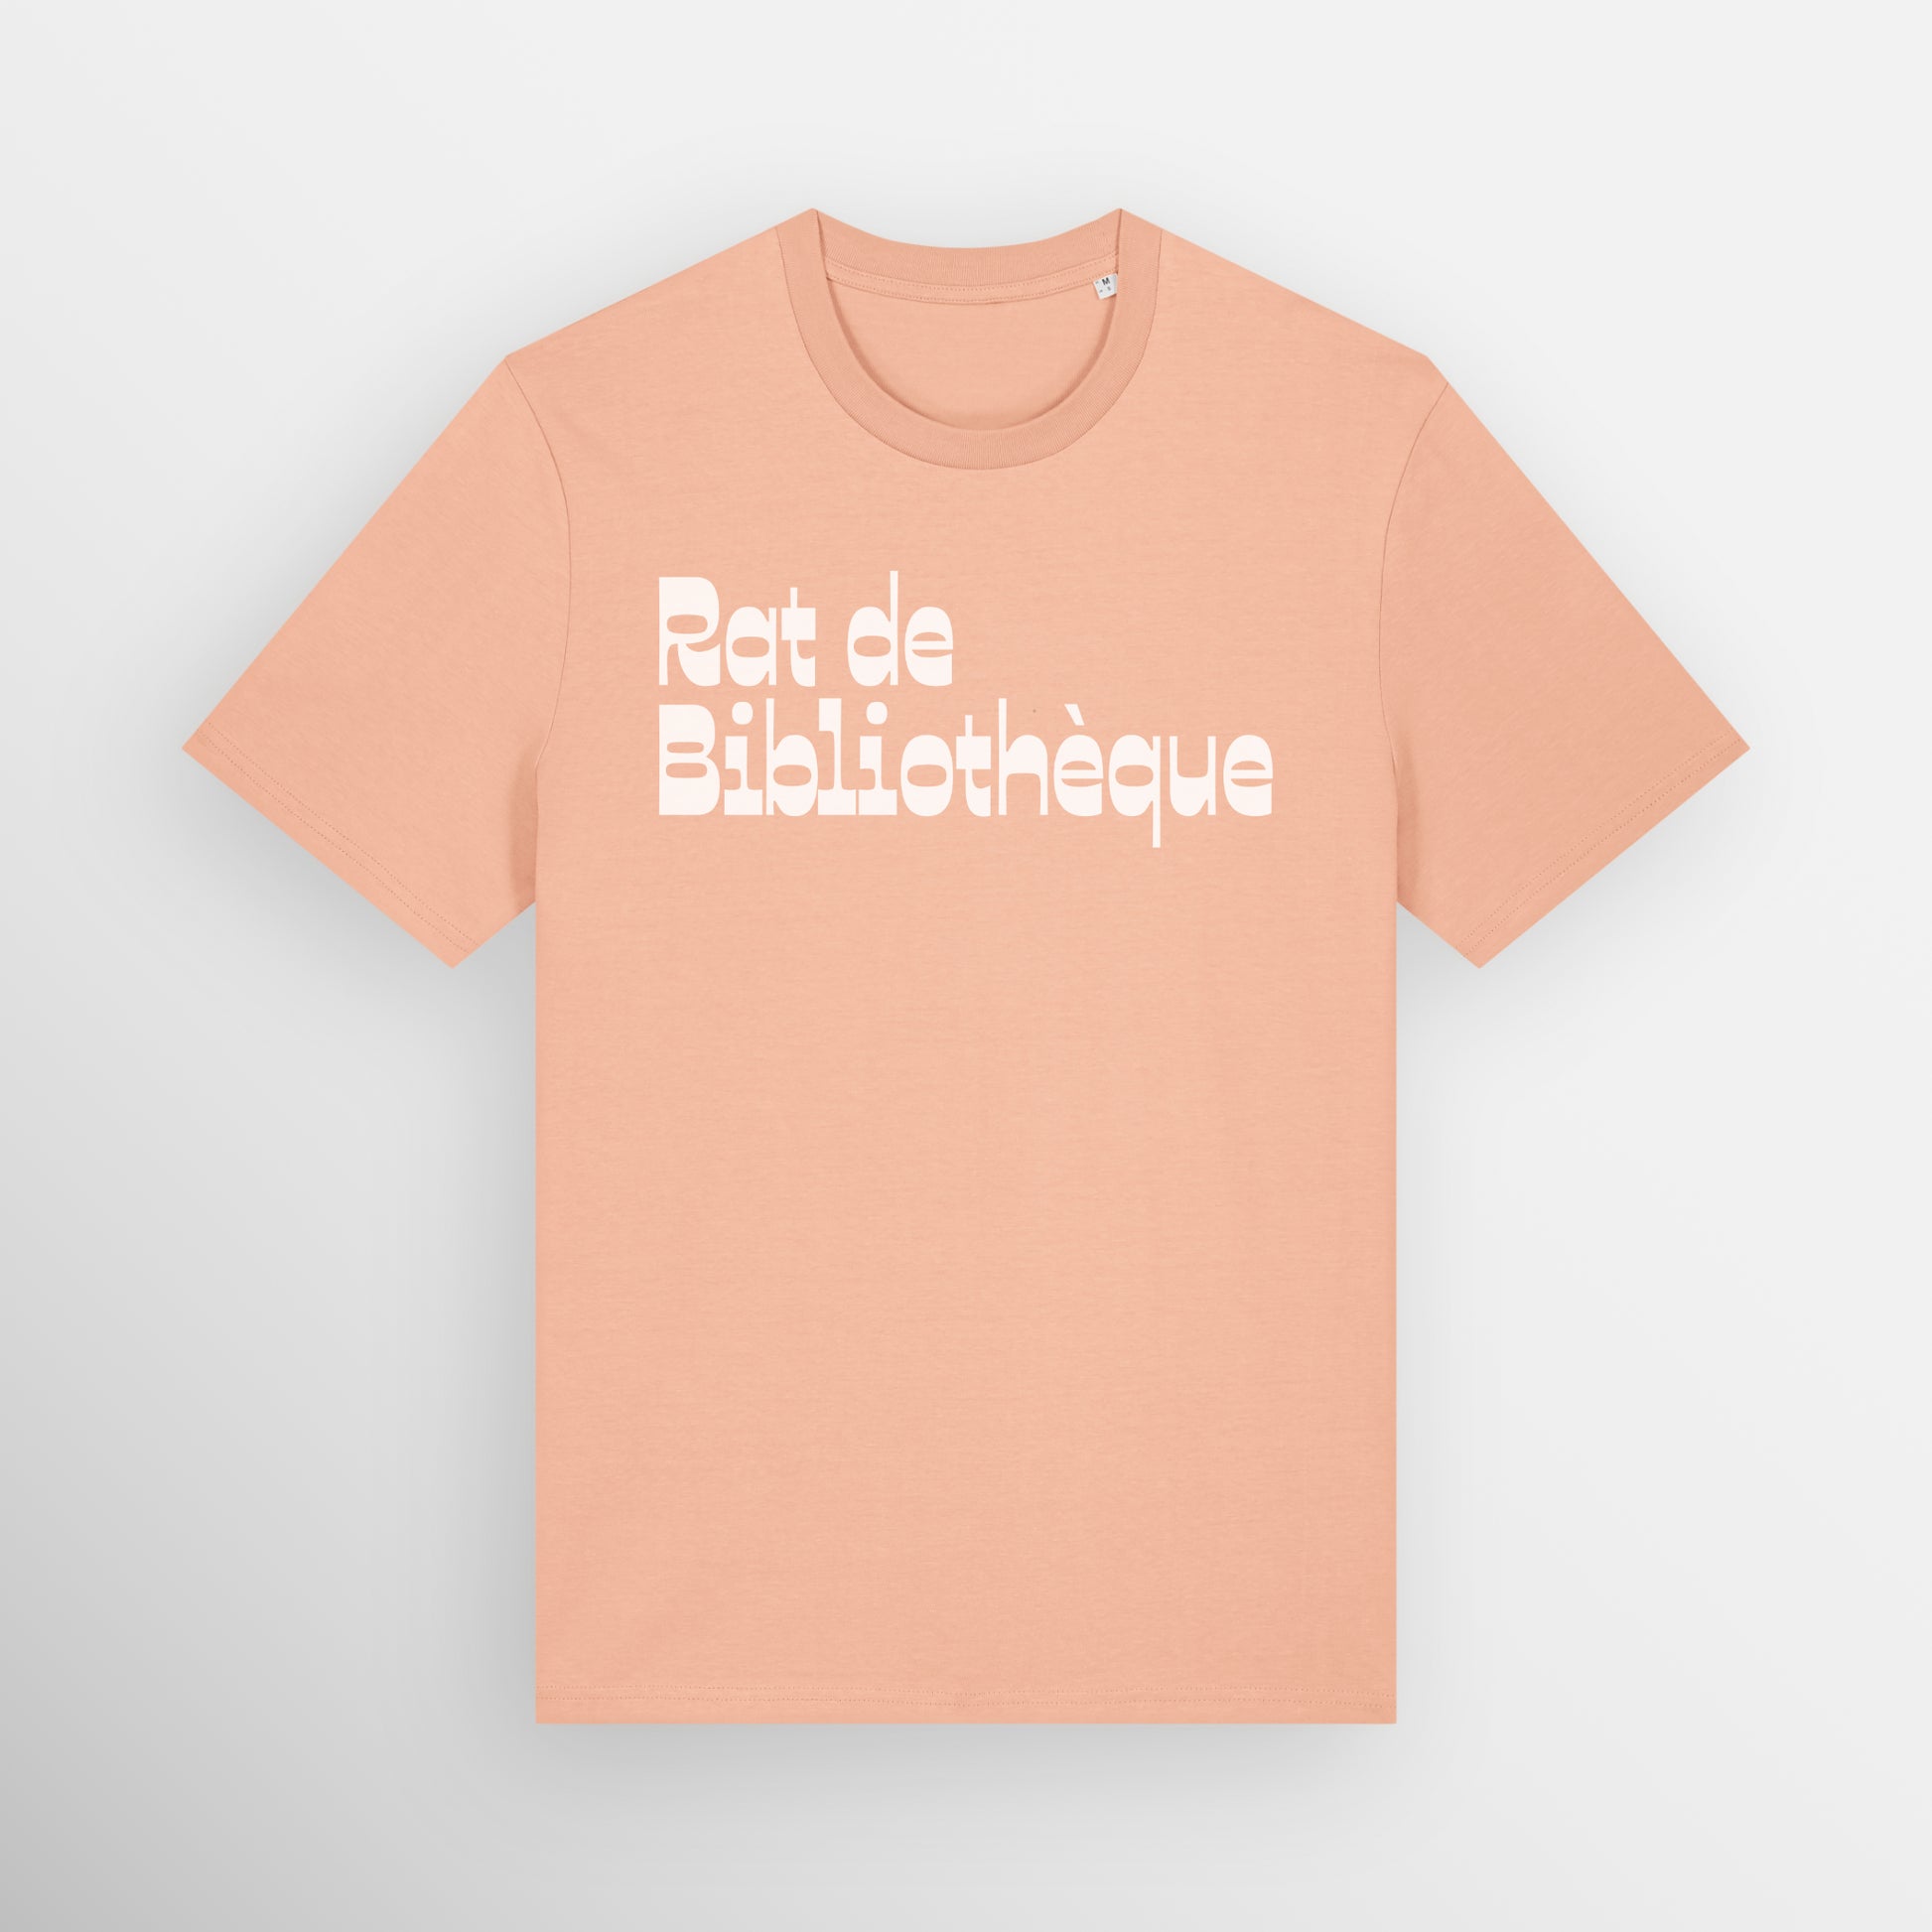 Fresh Peach coloured regular fit t-shirt with Rat de Bibliothèque written on the front in white, which is French for bookworm.